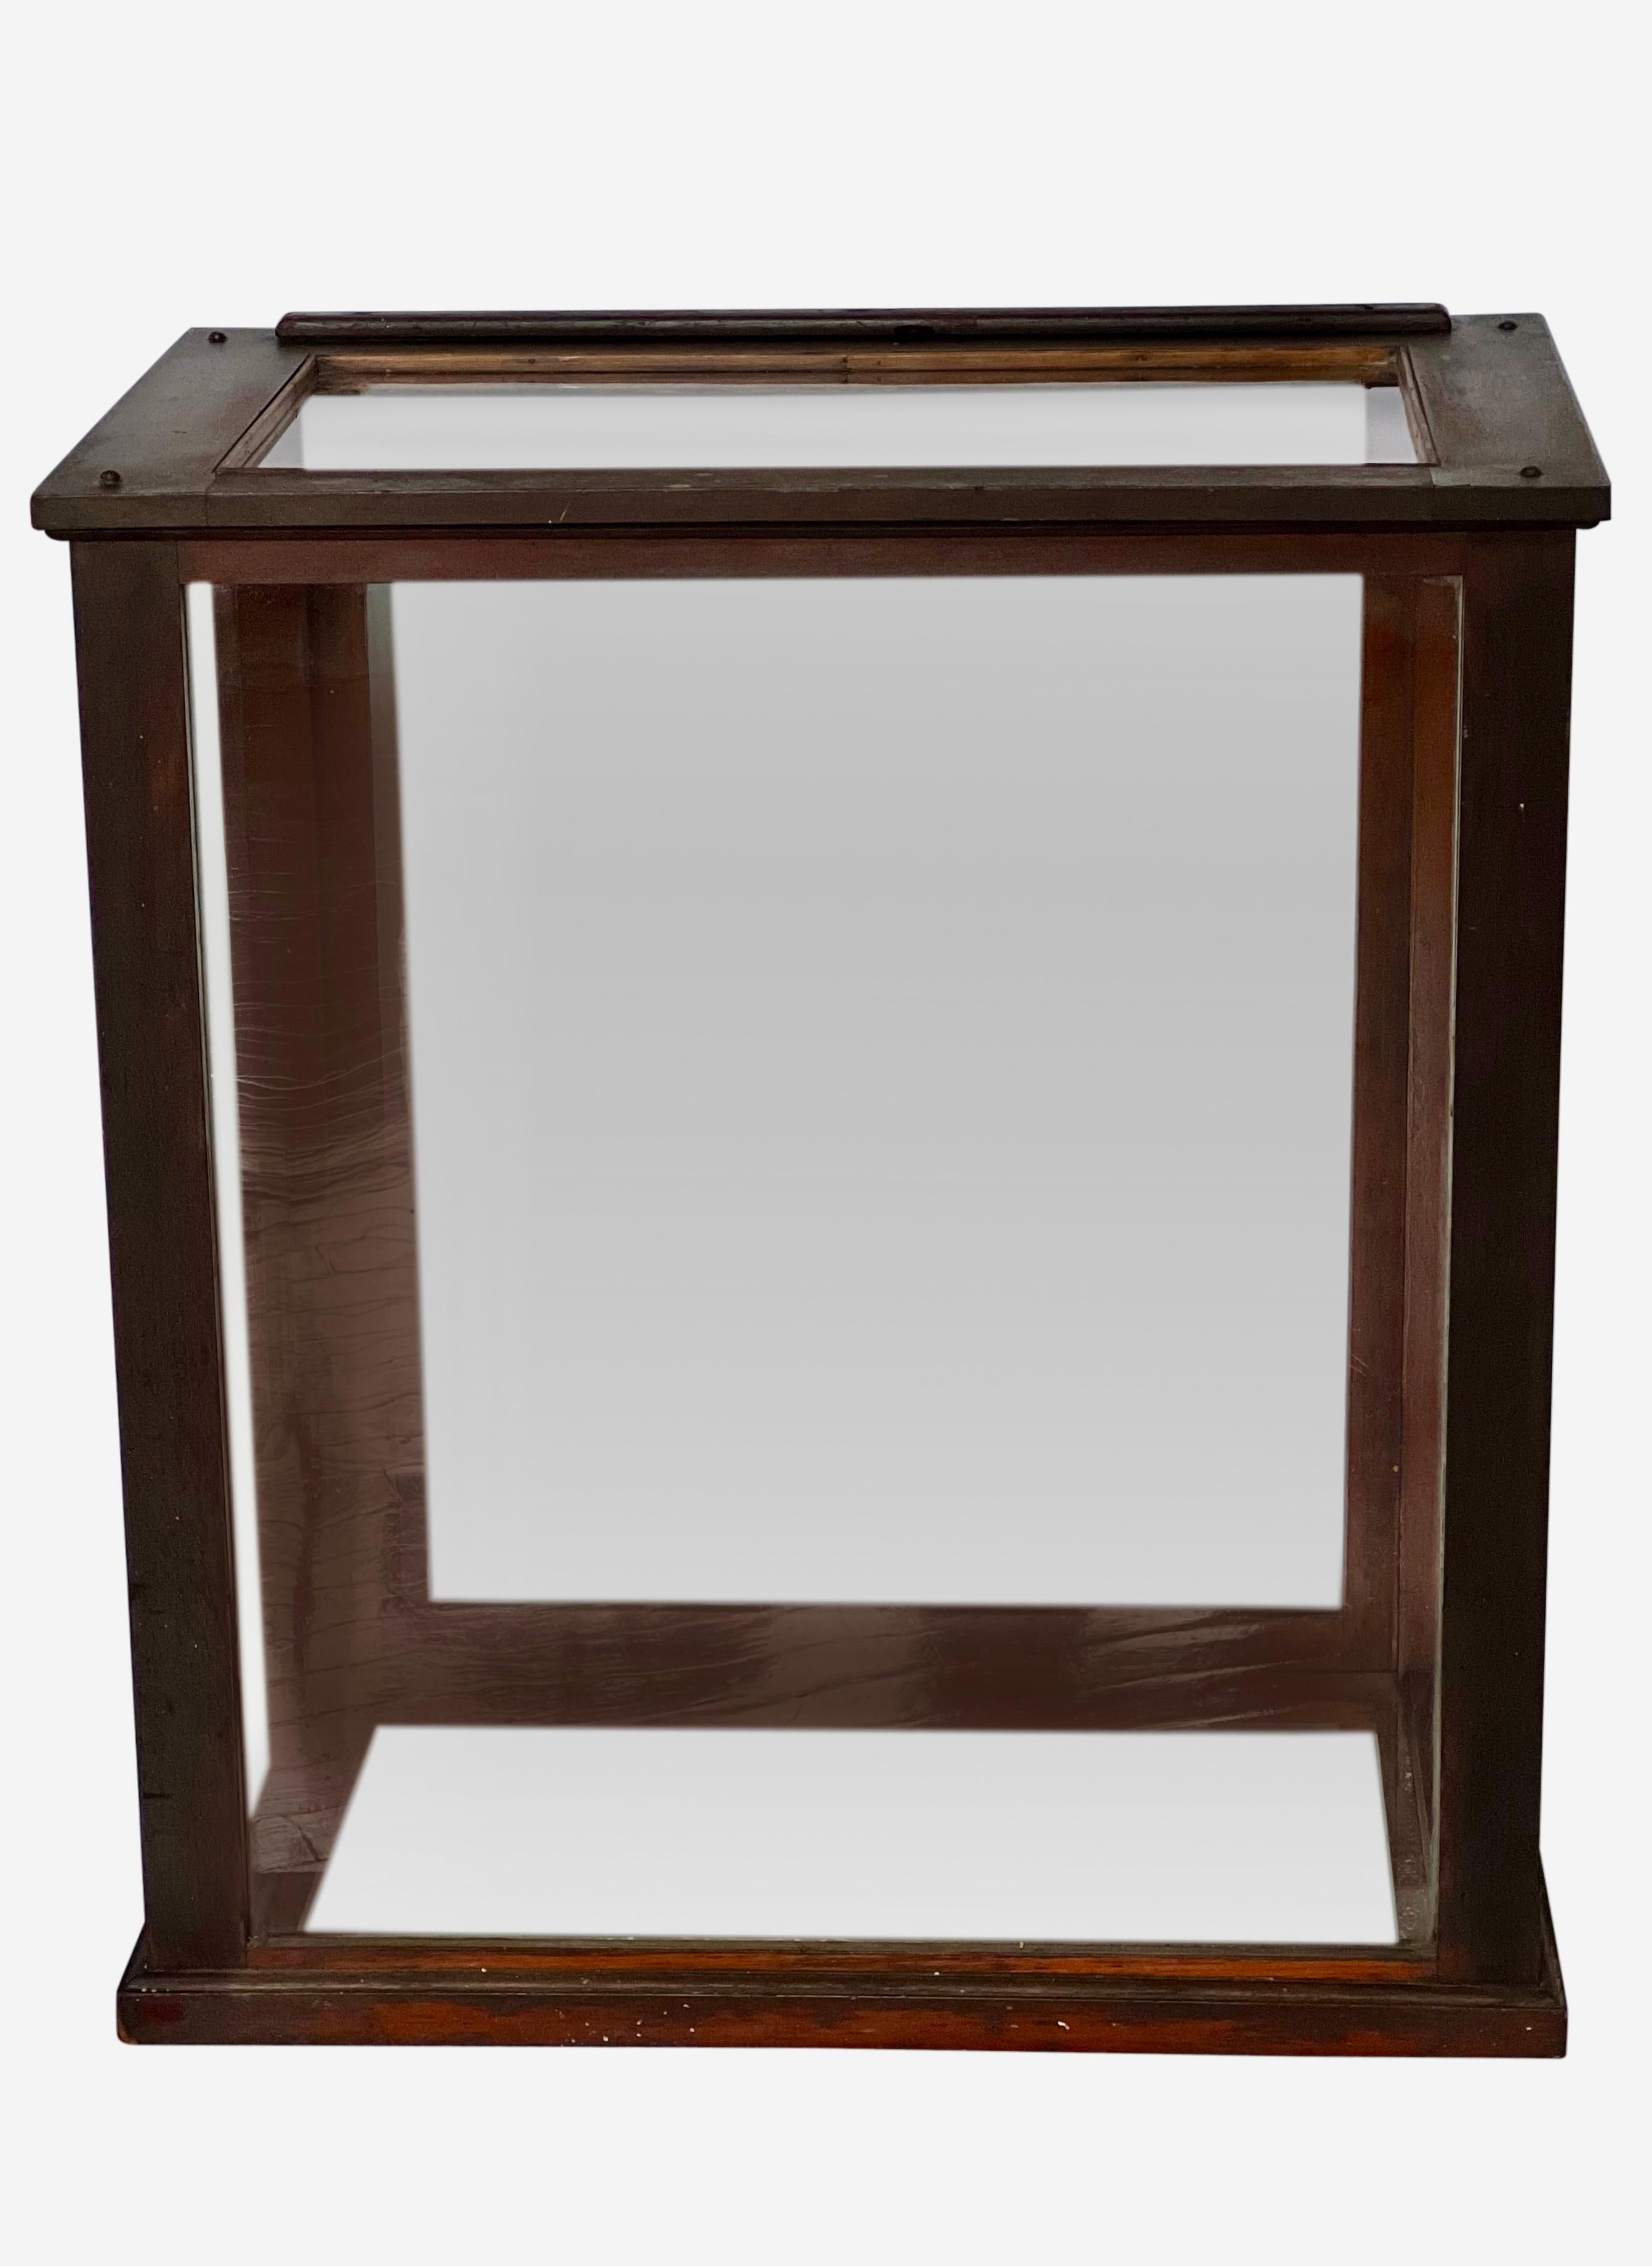 Antique mahogany tabletop display case, England, circa 1900.

This wonderful six-sided glass vitrine features a vertical sliding panel in the back. All original glass and mahogany wood frame are in good condition. Simple design with the old glass